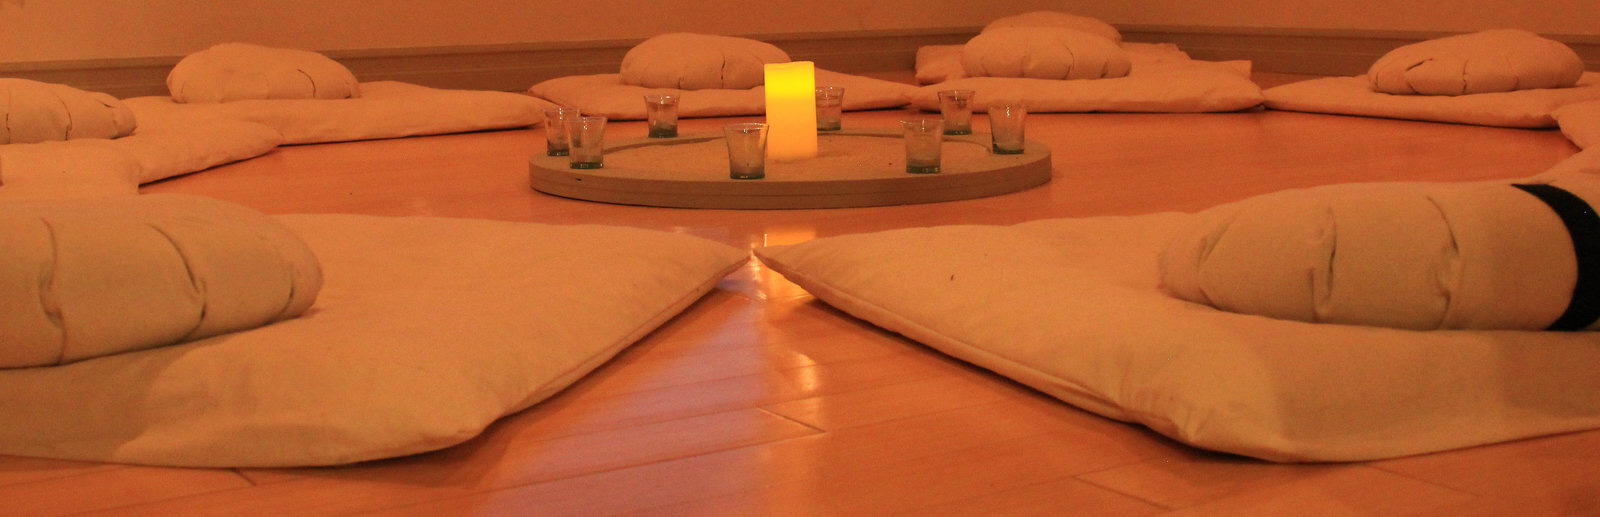 The meditation room at the Creative Wellness Center.